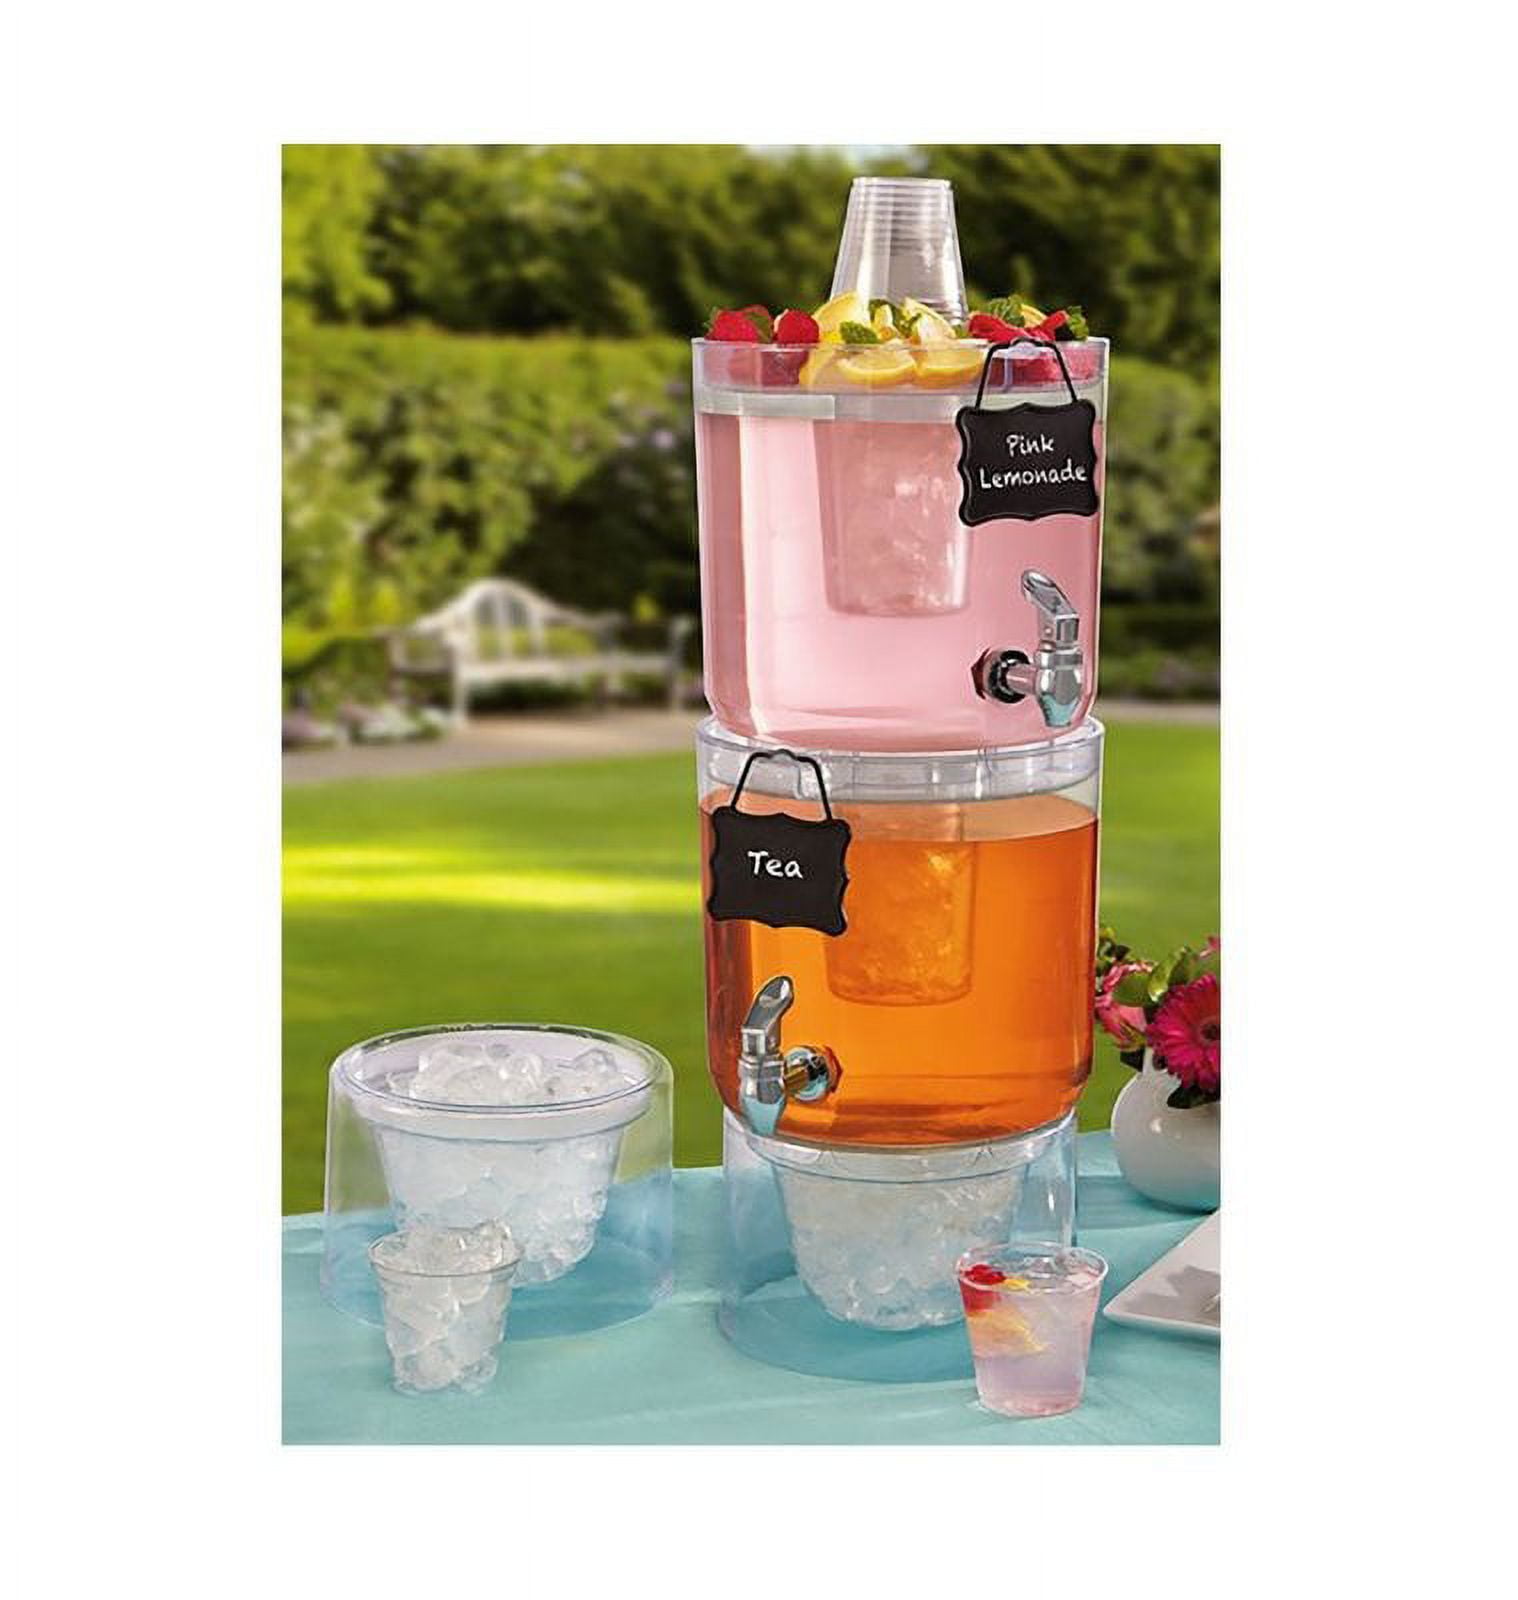 Commercial Iced Tea Dispensers - Chef's Deal